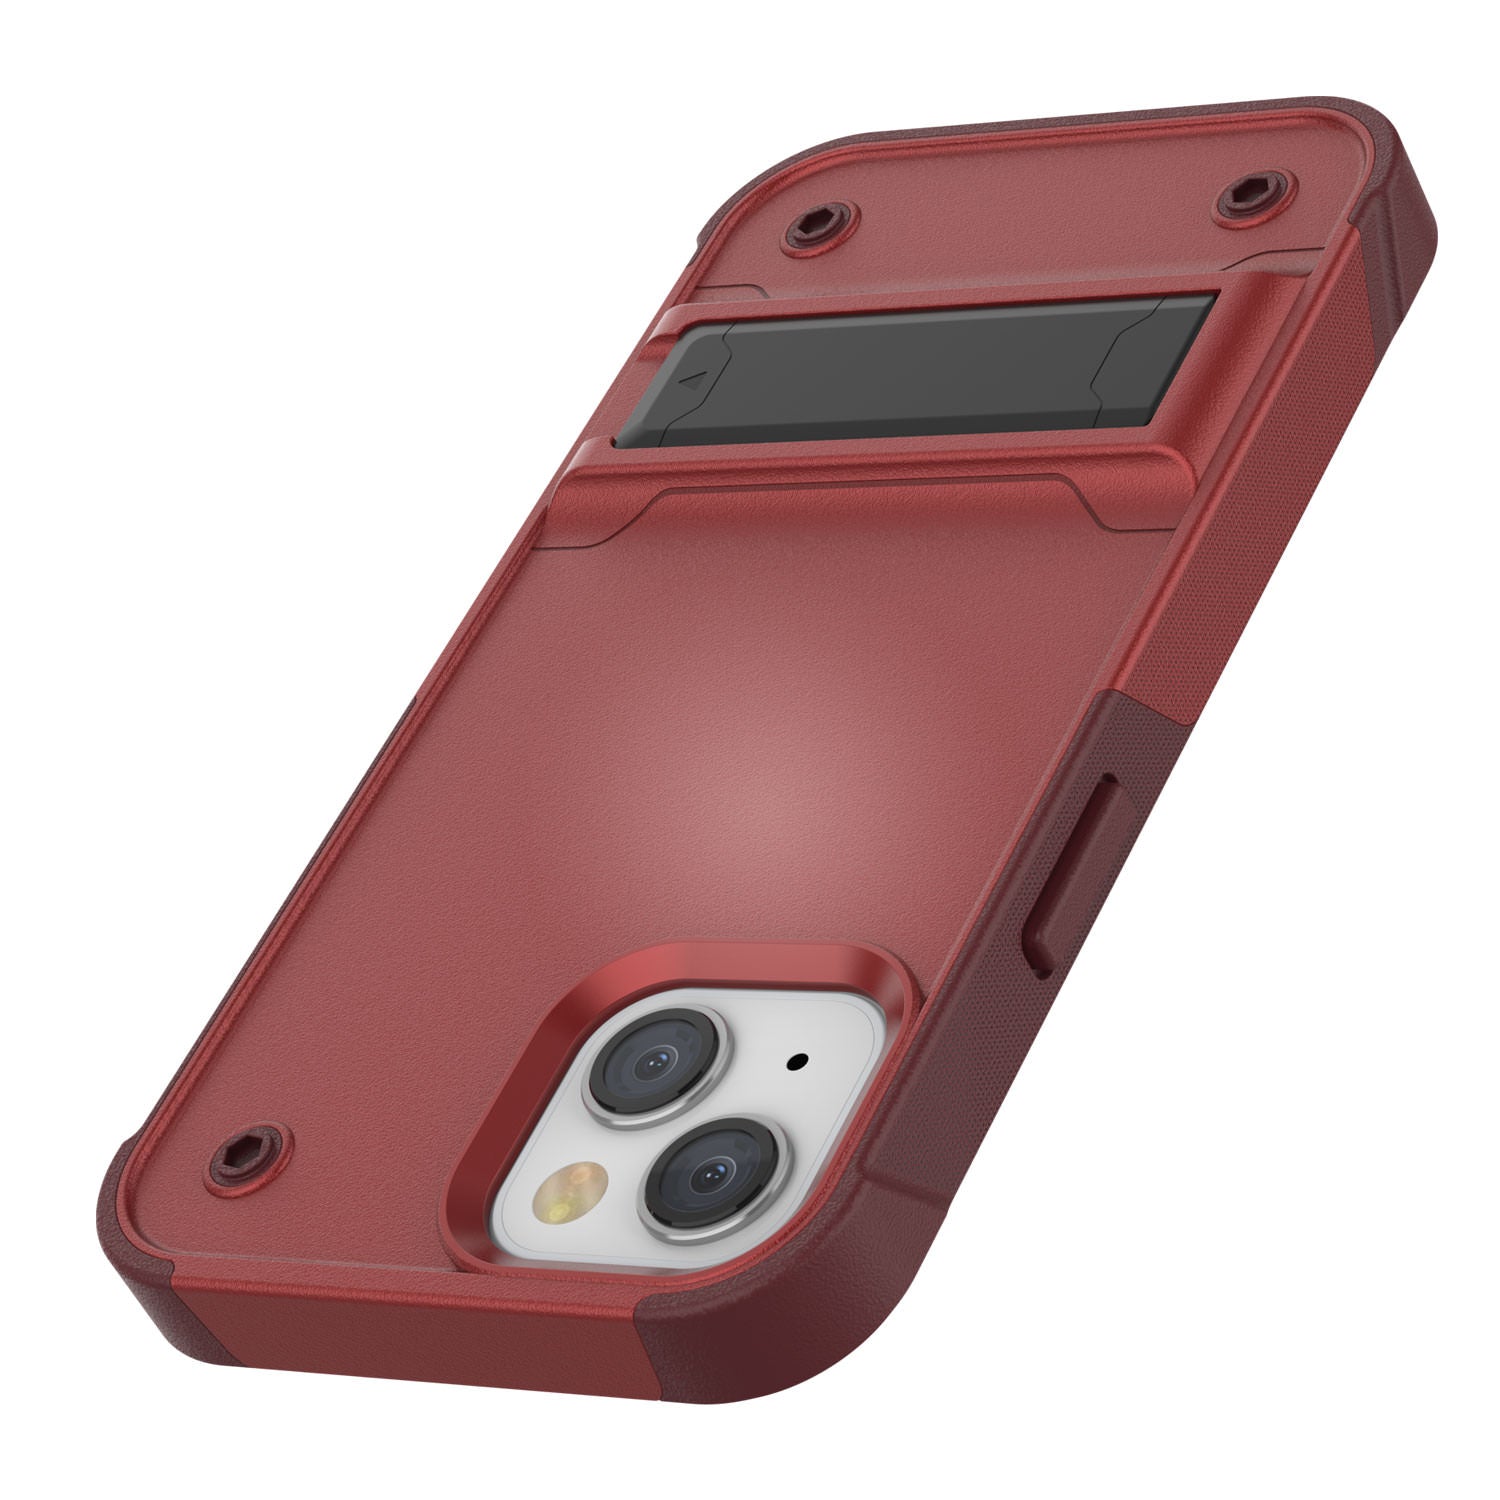 Punkcase iPhone 14 Plus Case [Reliance Series] Protective Hybrid Military Grade Cover W/Built-in Kickstand [Red-Rose]